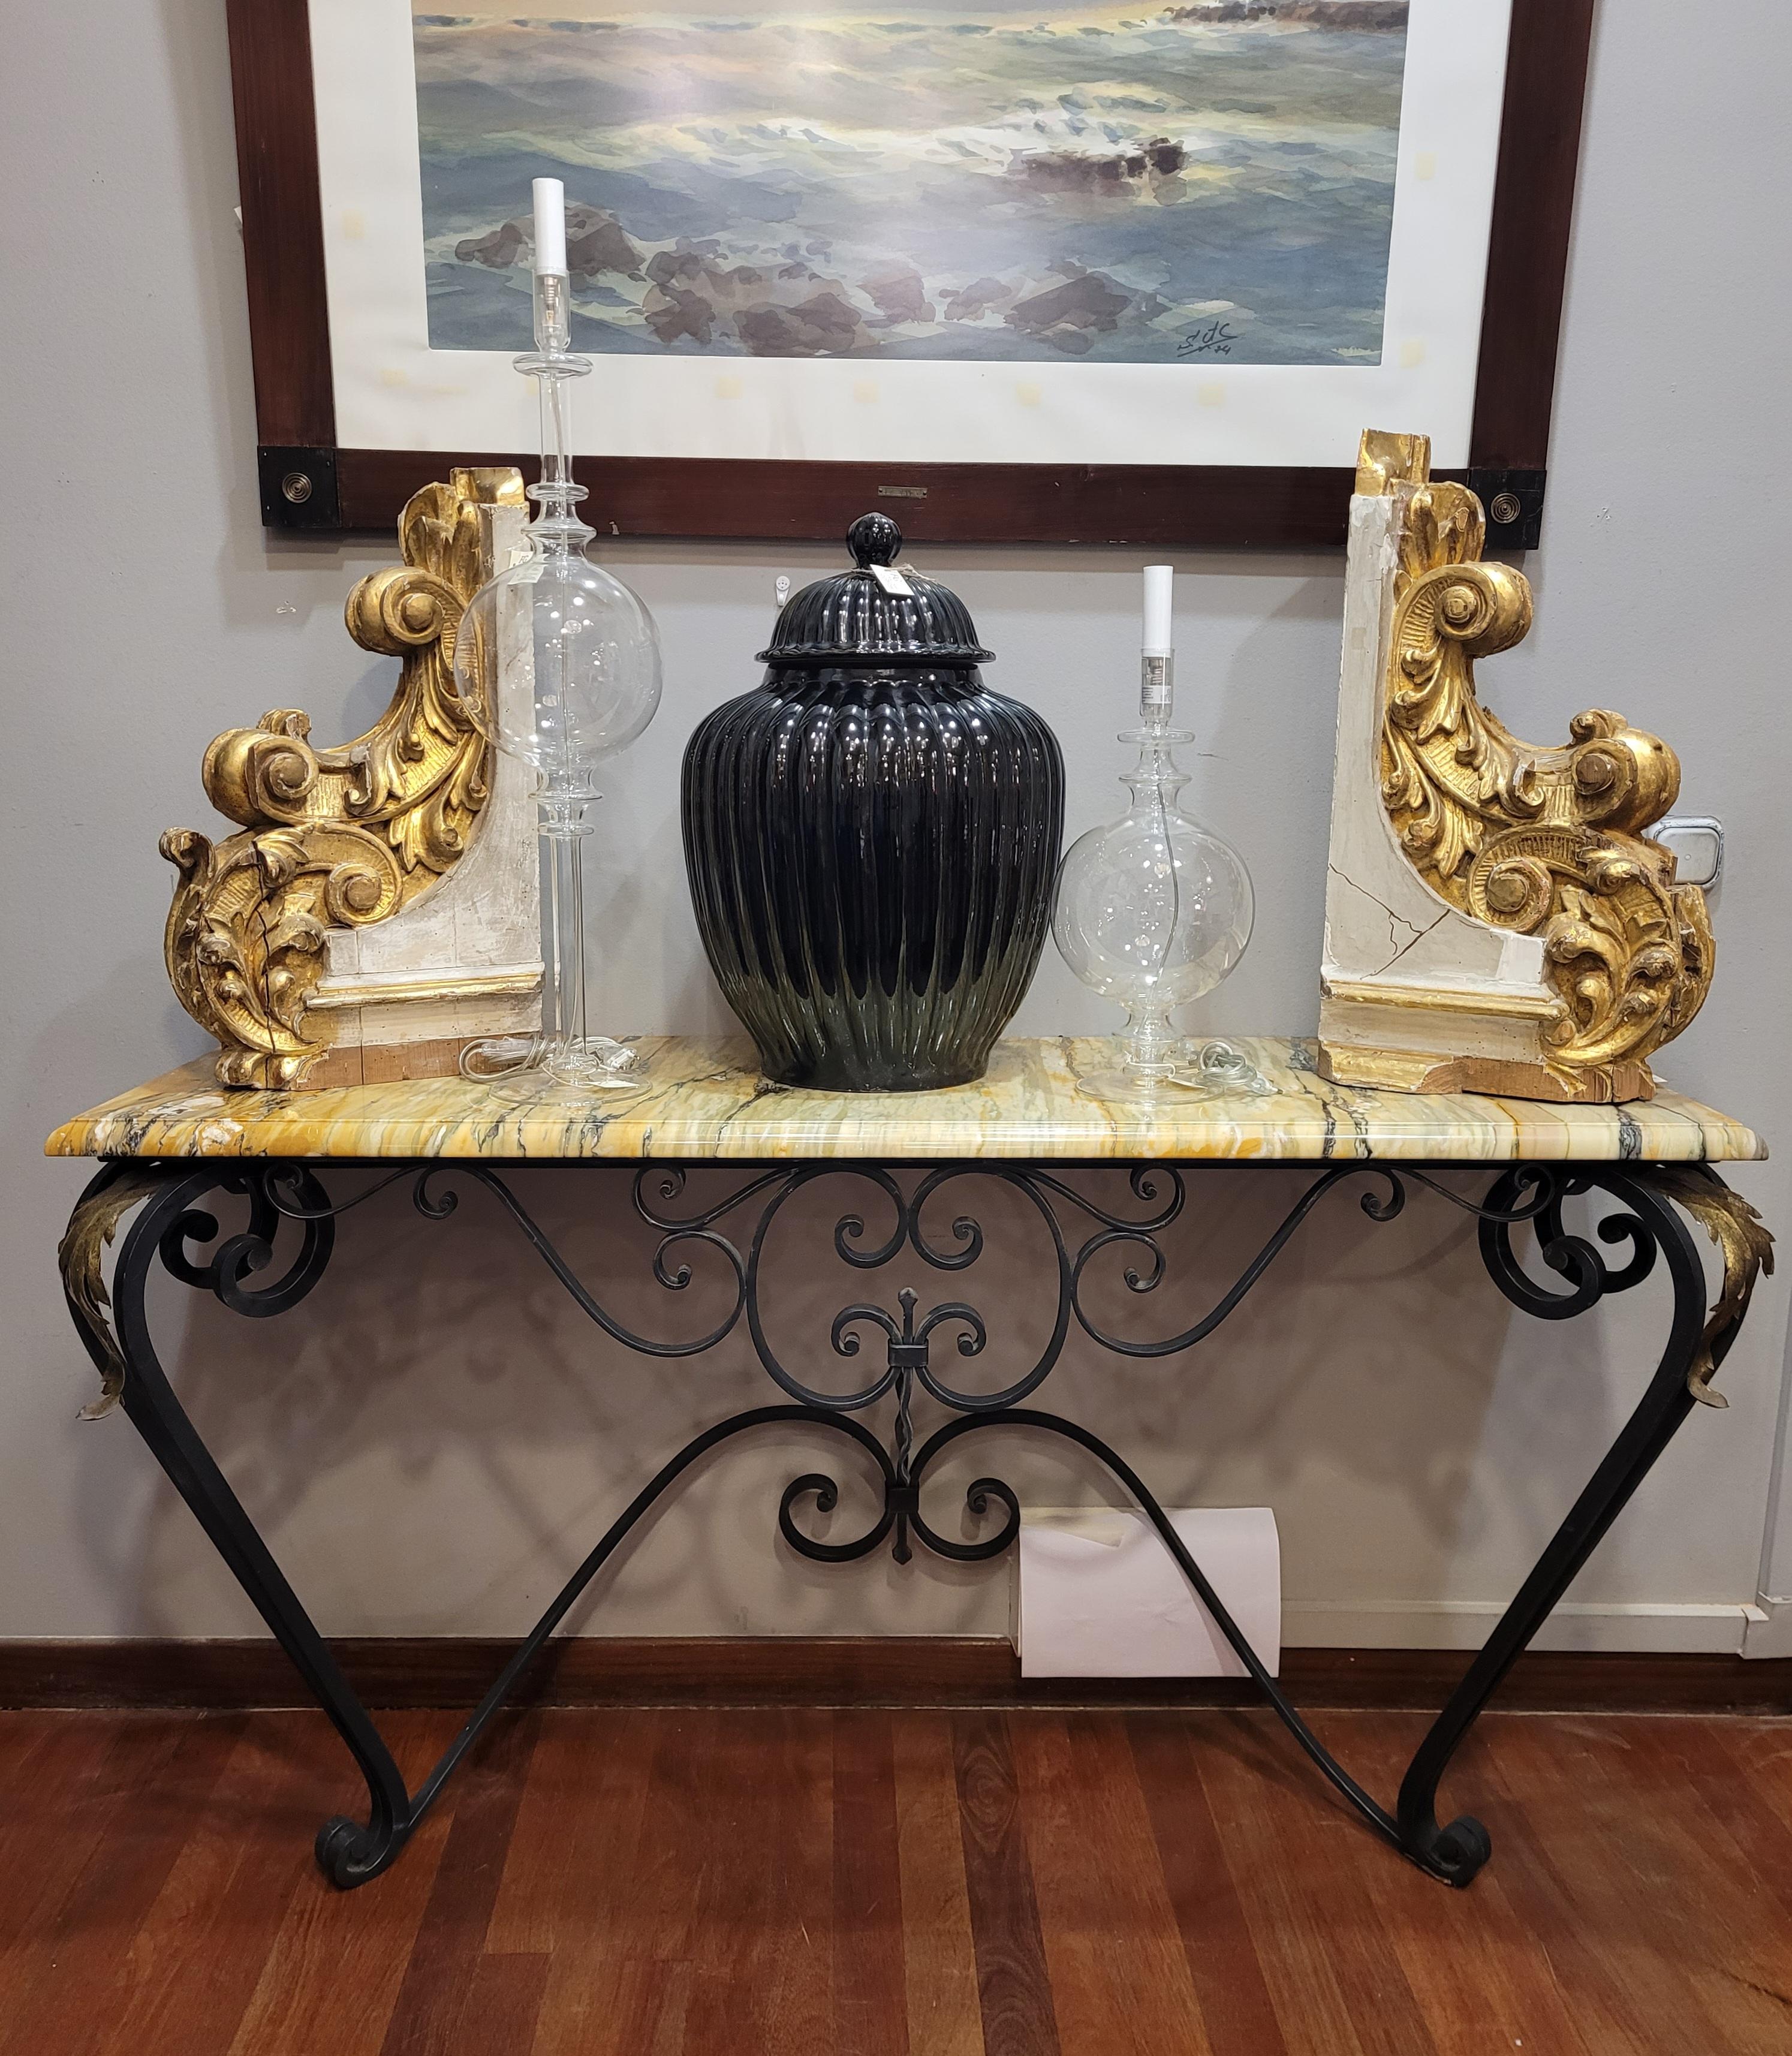 Outstanding Art Nouveau console with a rectangular profile with a wrought iron base and corner decoration with palm leaves in gold metal resting on two sinuous legs. Thick and bright Marble top with rounded profiles in a tone of soft green with